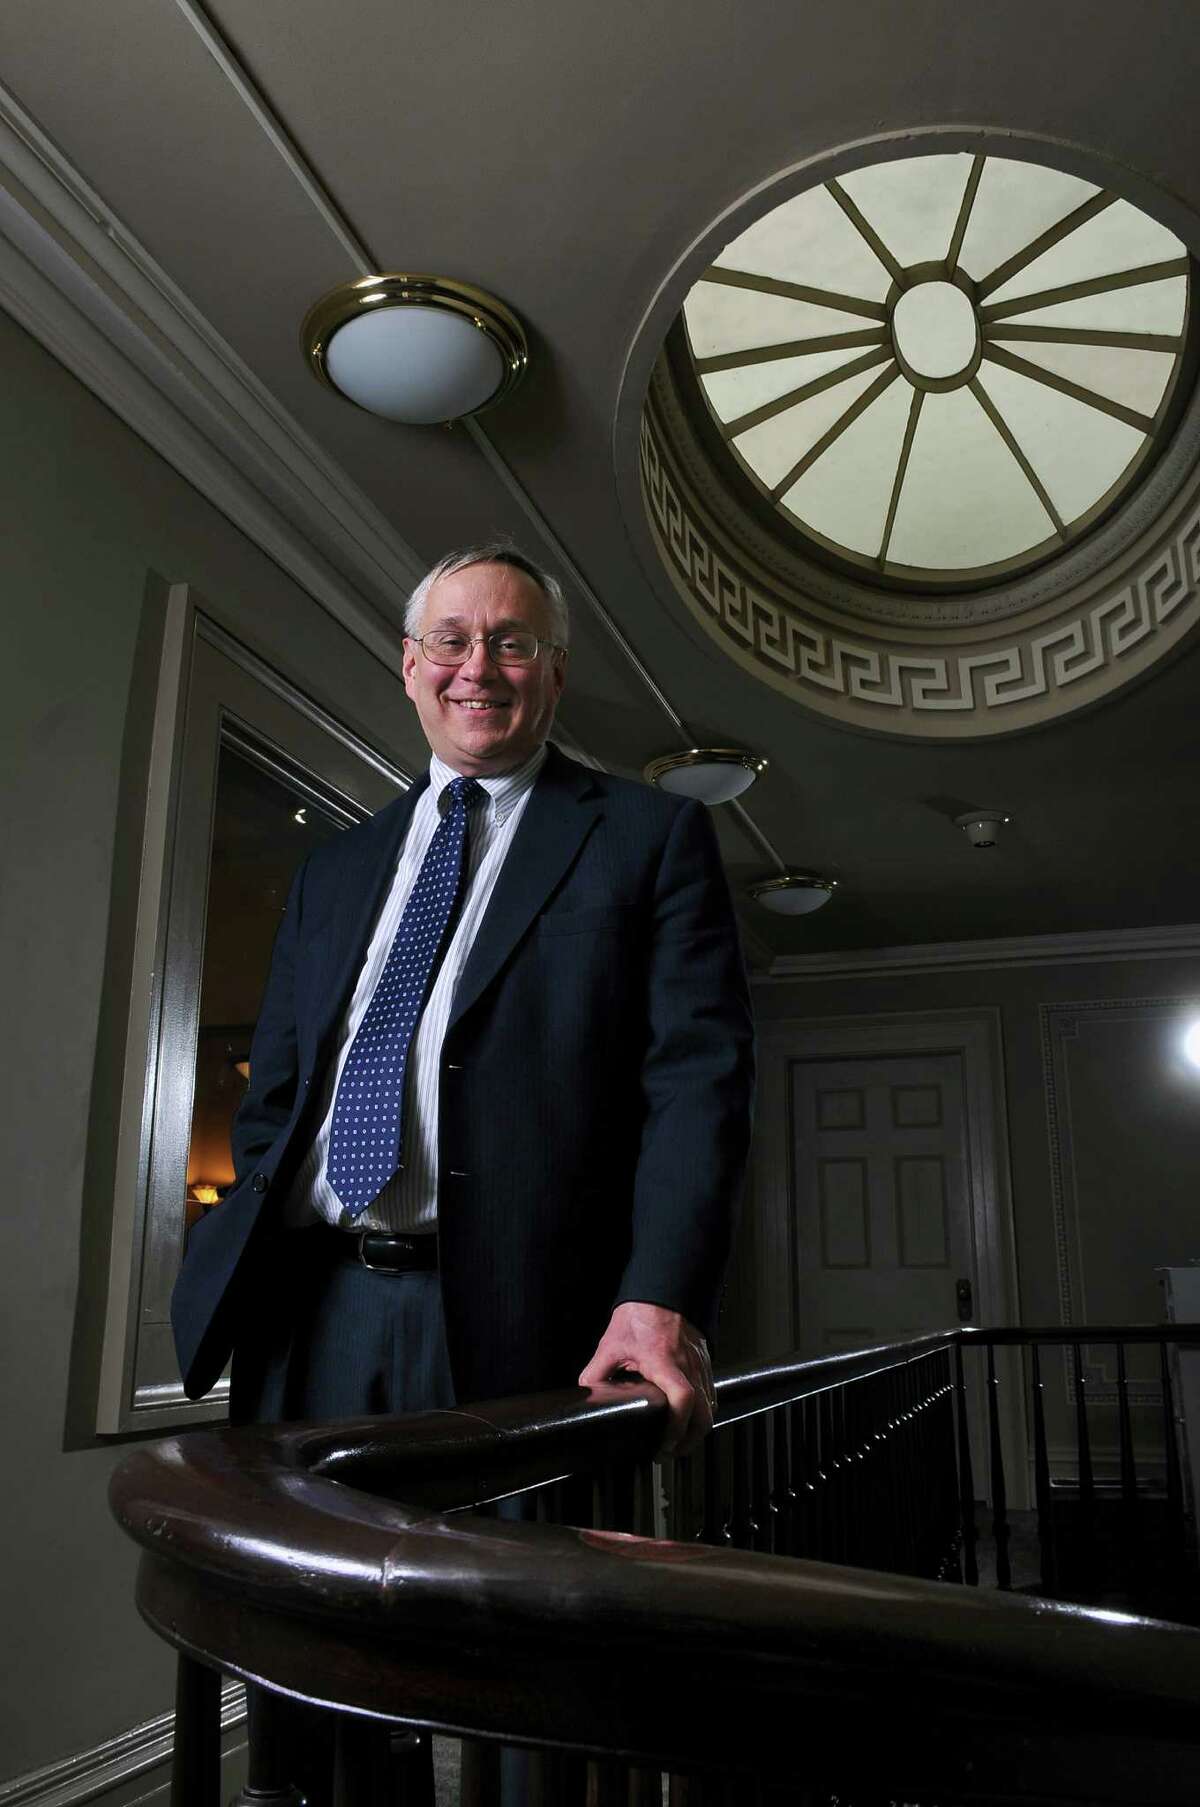 Robert Lowry, Deputy Director of the New York State Council of School Superintendents, in a hallway outside of his office on Wednesday April 13, 2011 in Albany, NY. (Philip Kamrass/ Times Union )